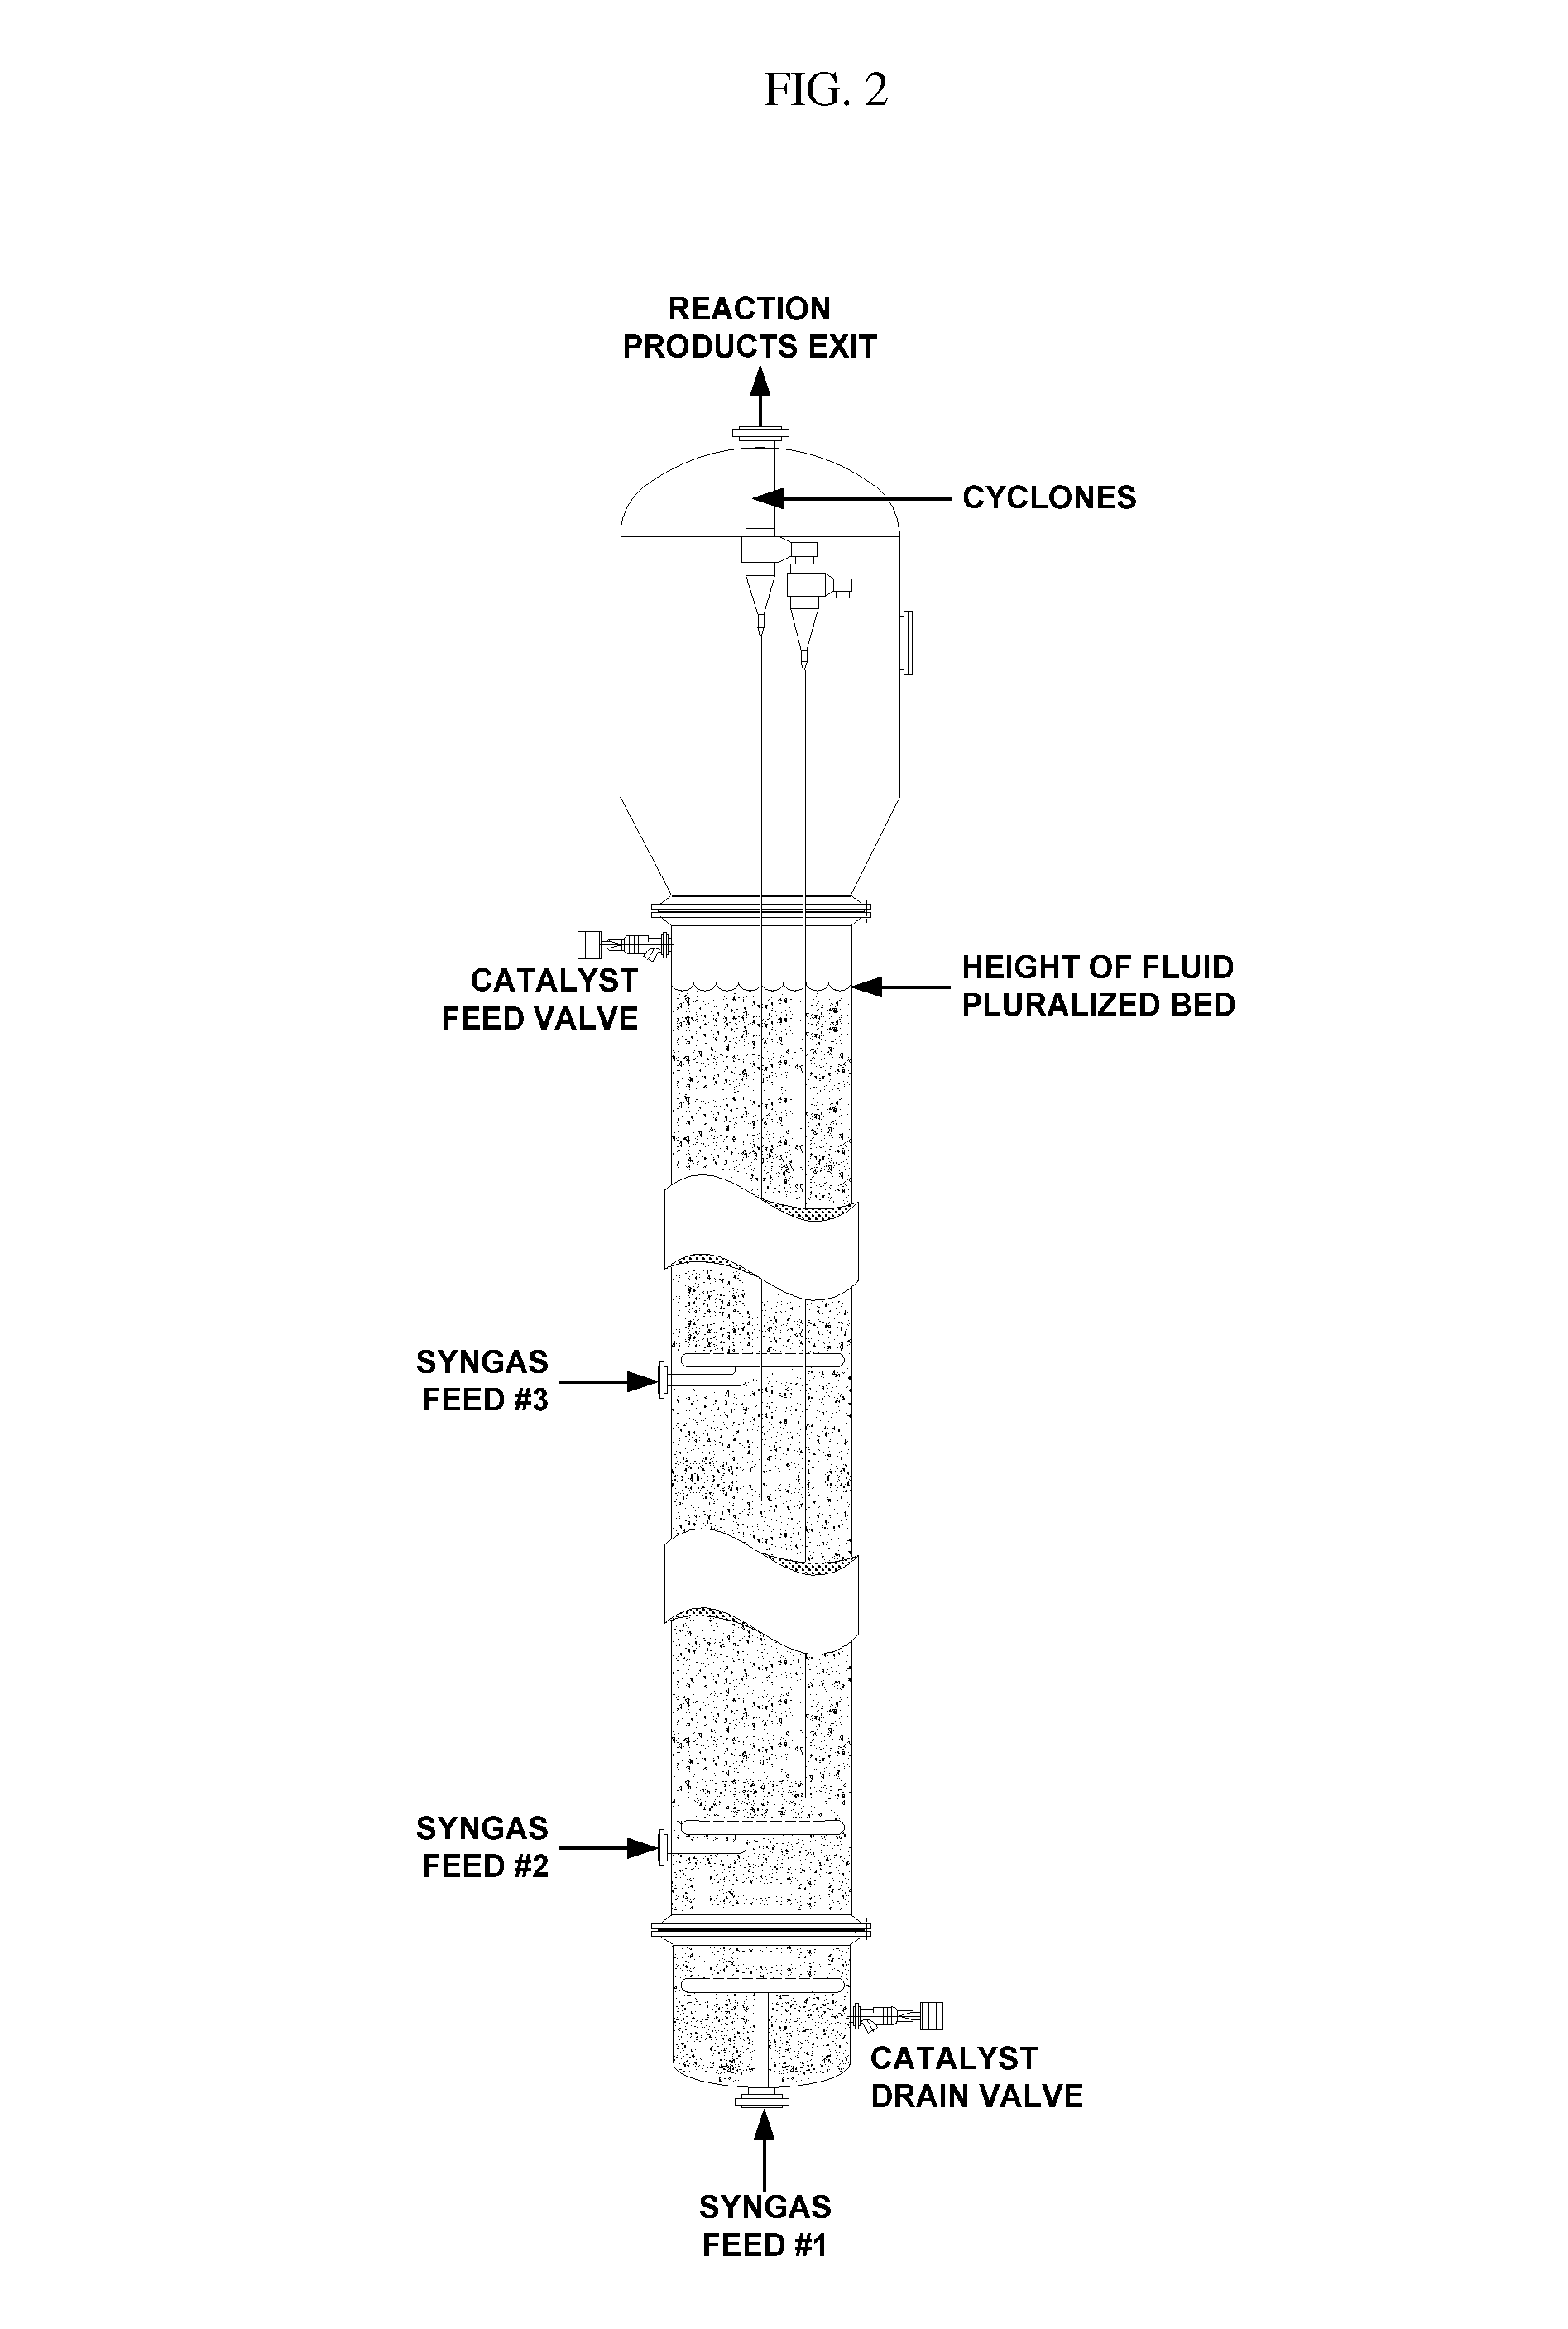 Synthesis of DME using a fluid pluralized bed reactor